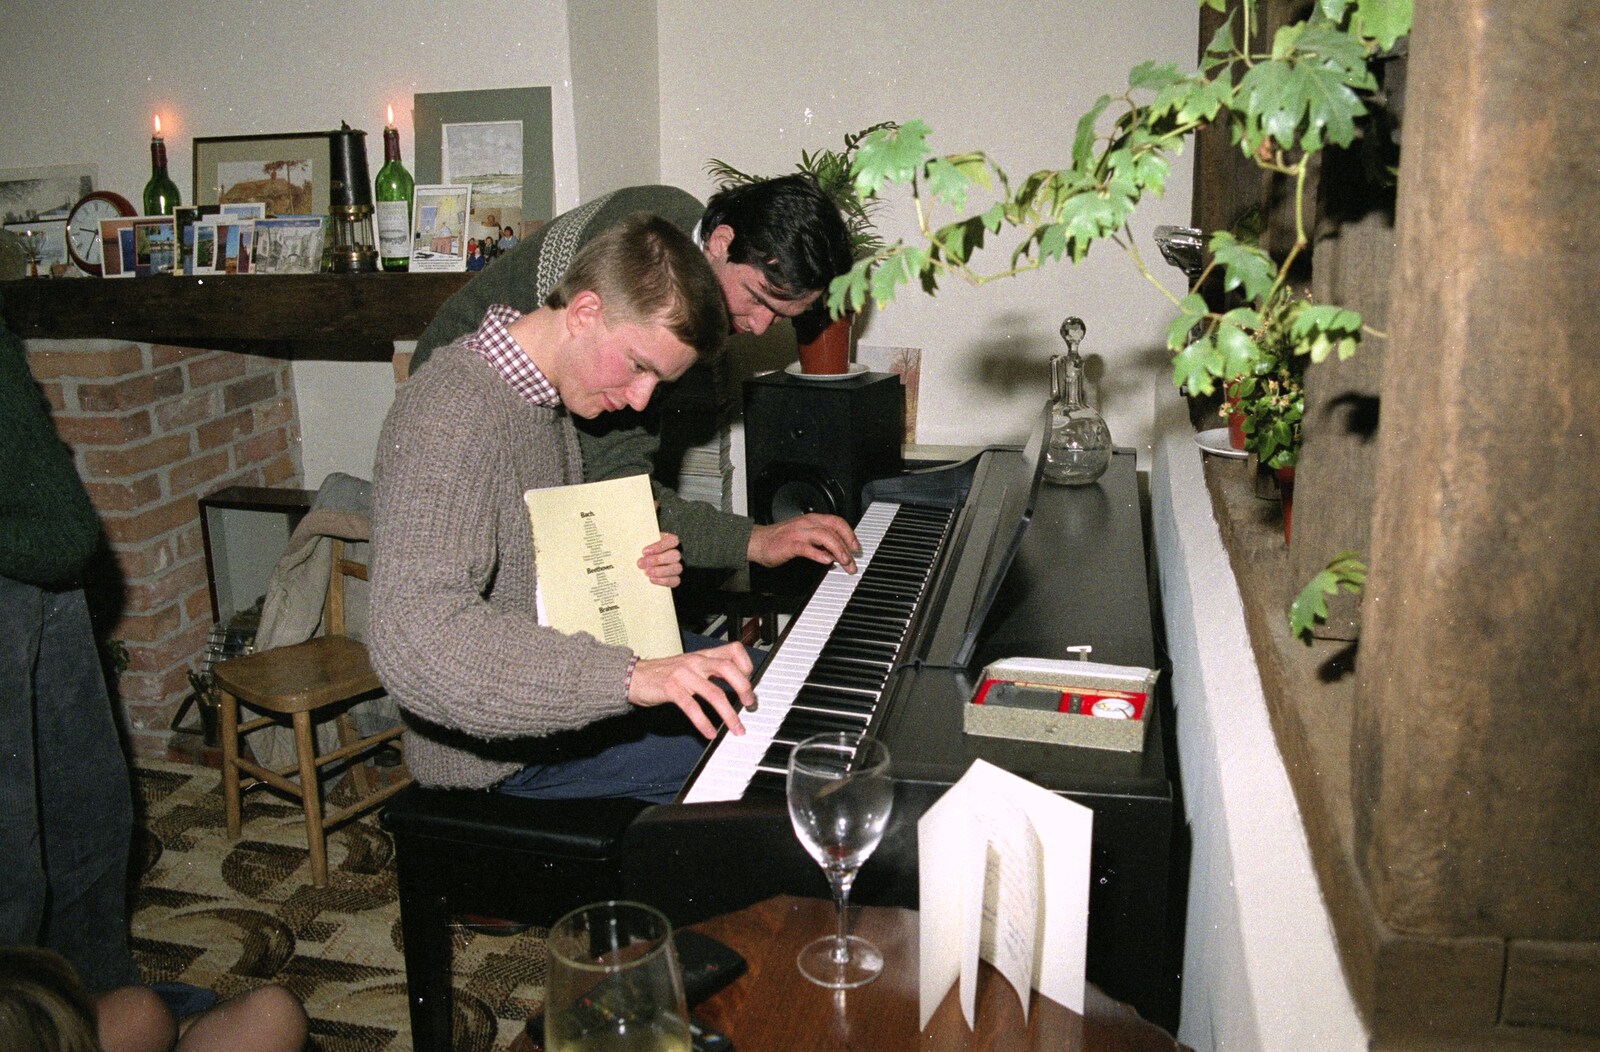 Nosher and David work something out on piano from Sledging on the Common and Some Music, Stuston, Suffolk - 5th February 1991